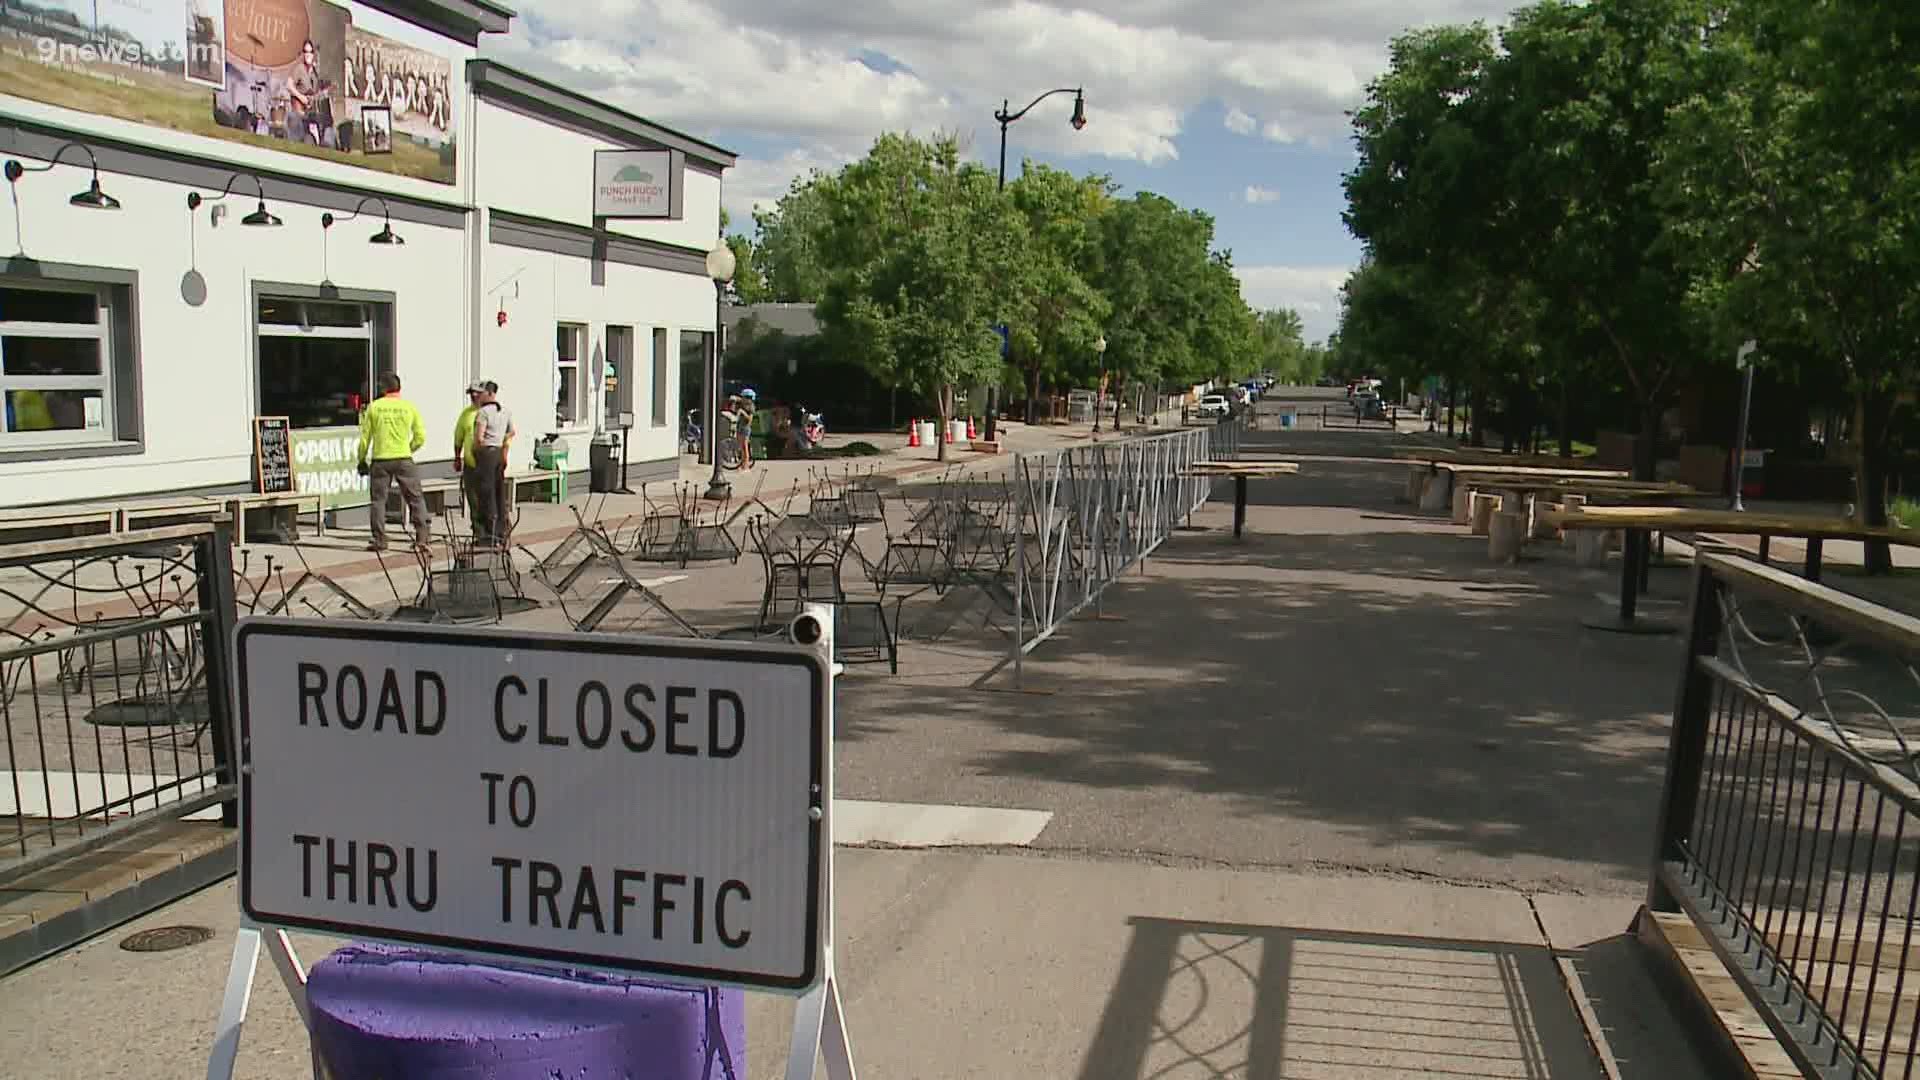 The street closures will remain in effect through at least Oct. 5.